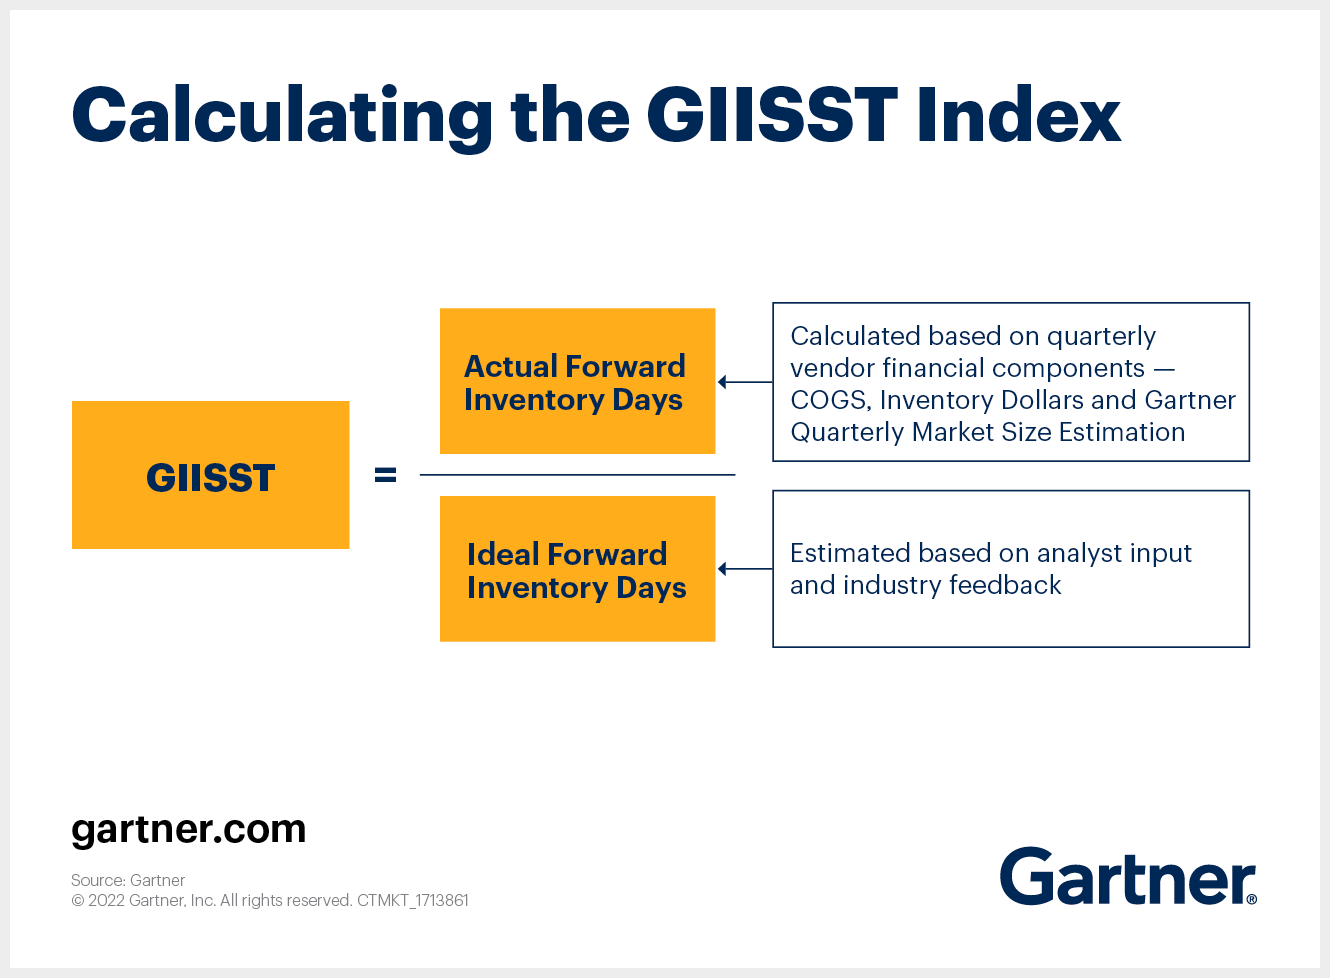 Calculating the GIISST Index